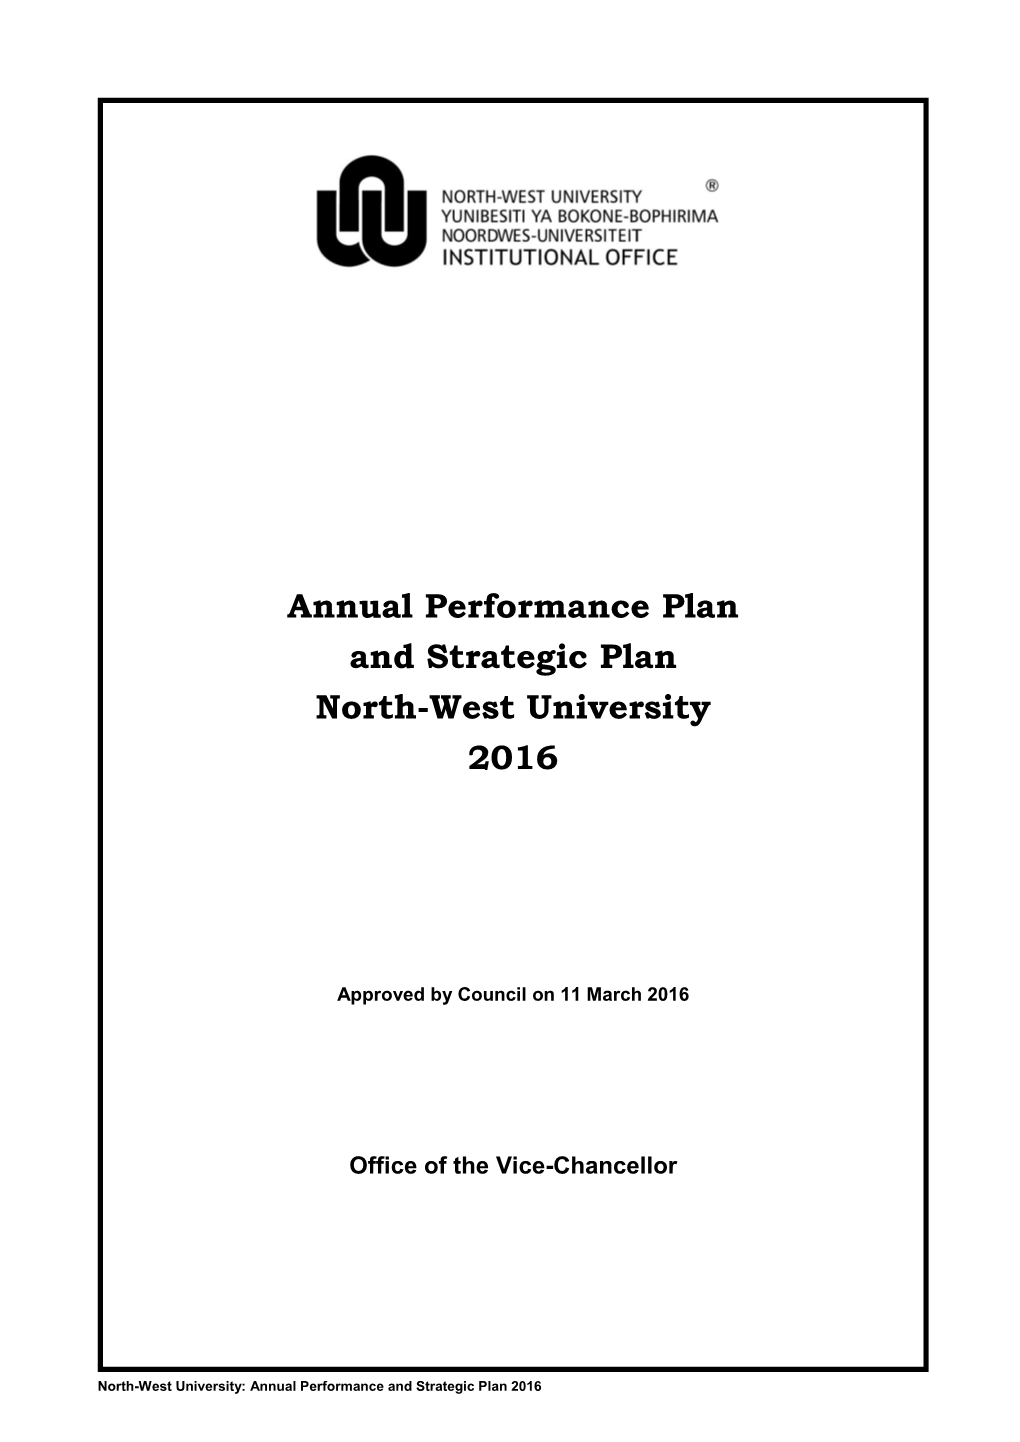 Annual Performance Plan and Strategic Plan North-West University 2016